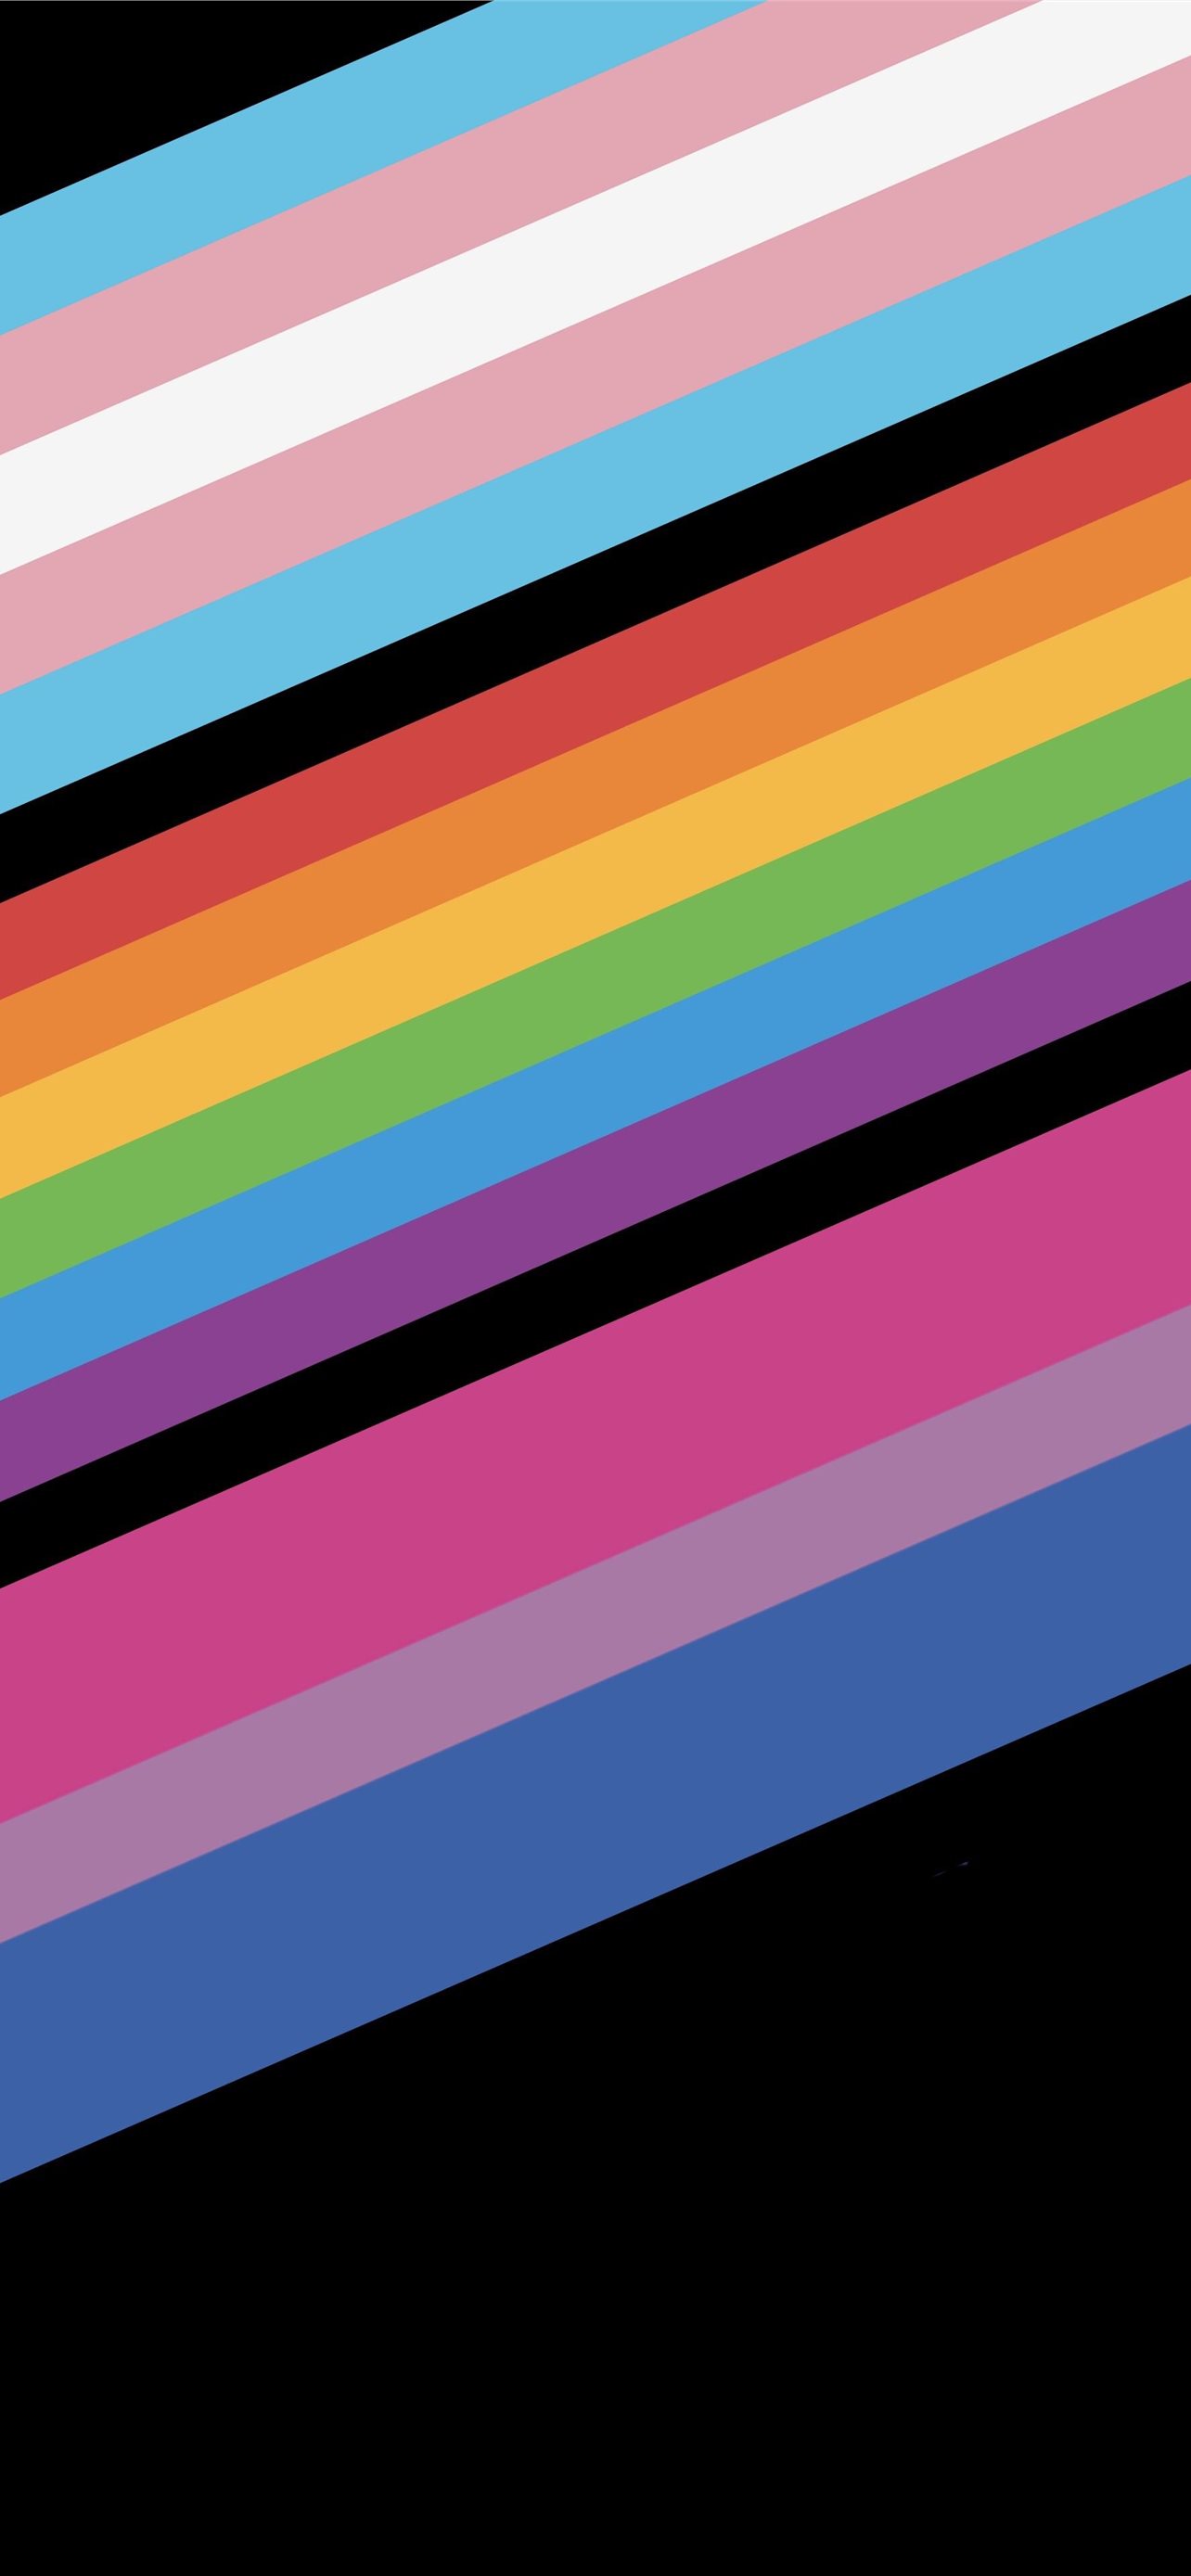 Lesbian pride flag wallpaper Open to requests Tried posting earlier but I  think the post failed  rlgbt